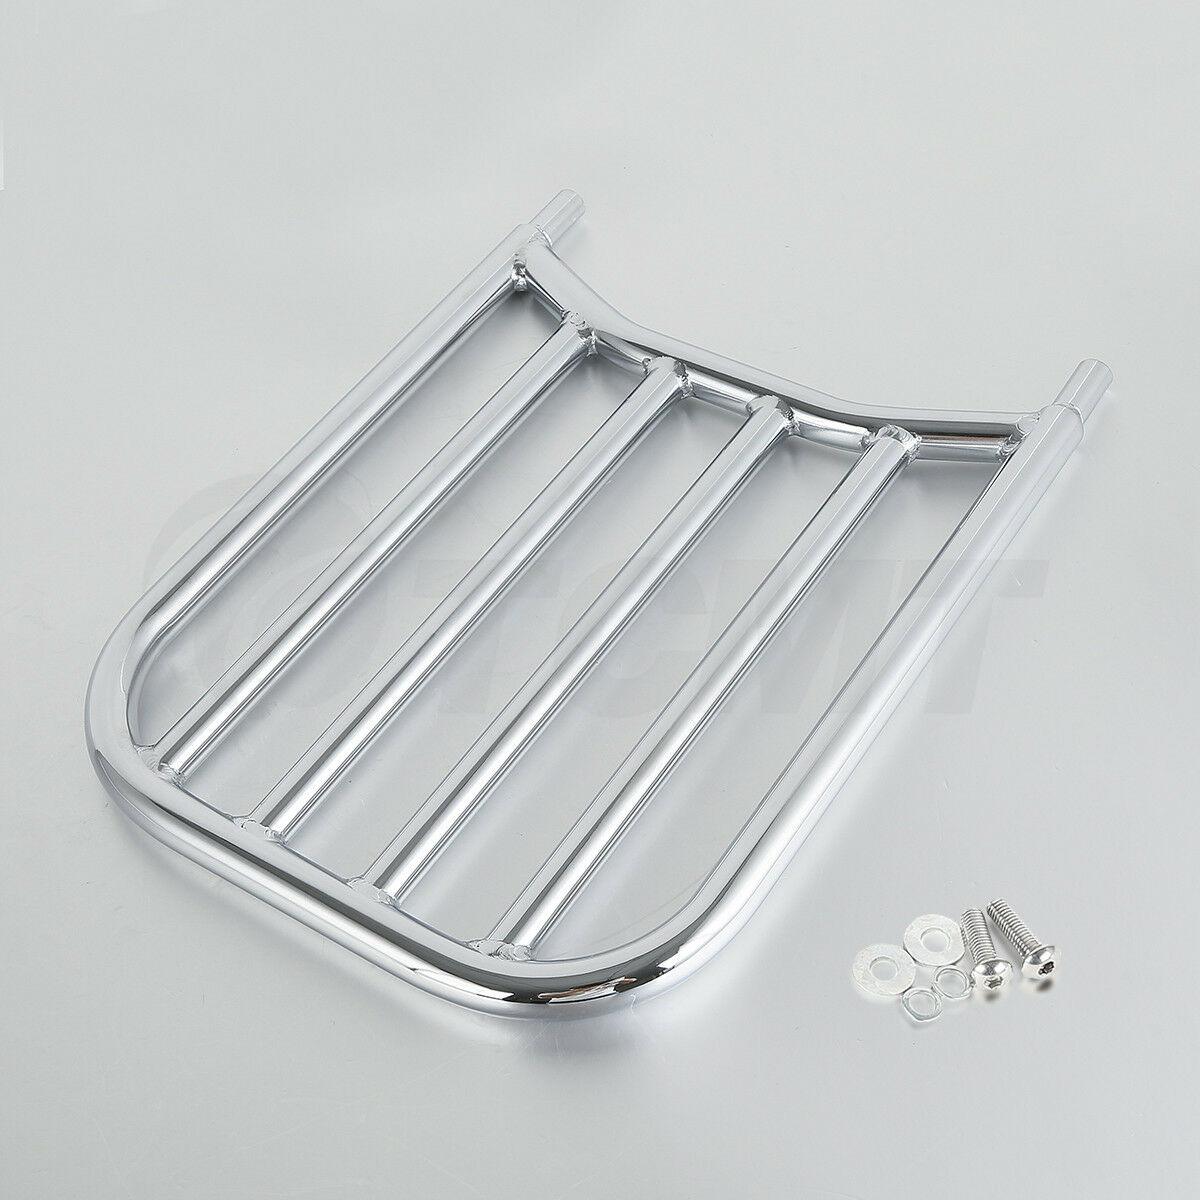 Rear Backrest Sissy Bar Luggage Rack Fit For Indian Chieftain Classic 18-20 2019 - Moto Life Products